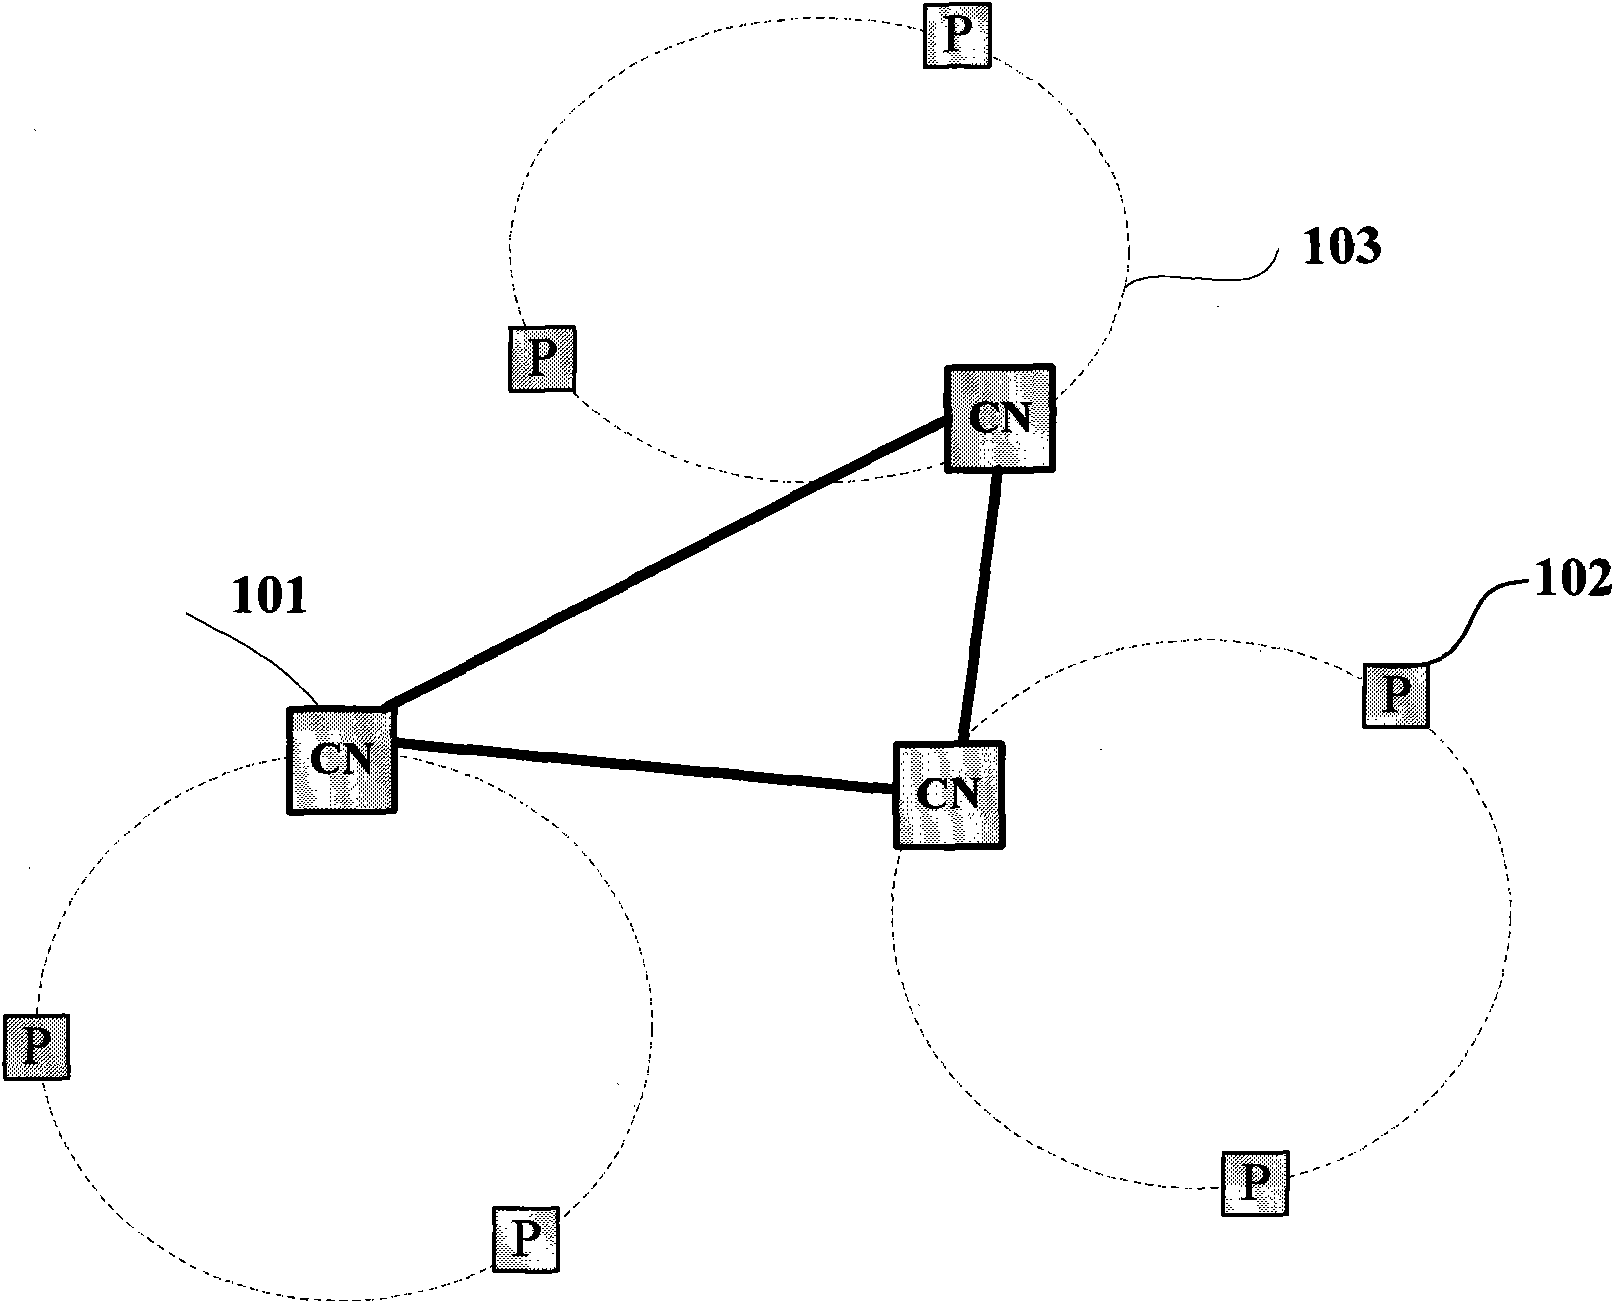 Credit evaluation method used in P2P overlay network configuration based on group